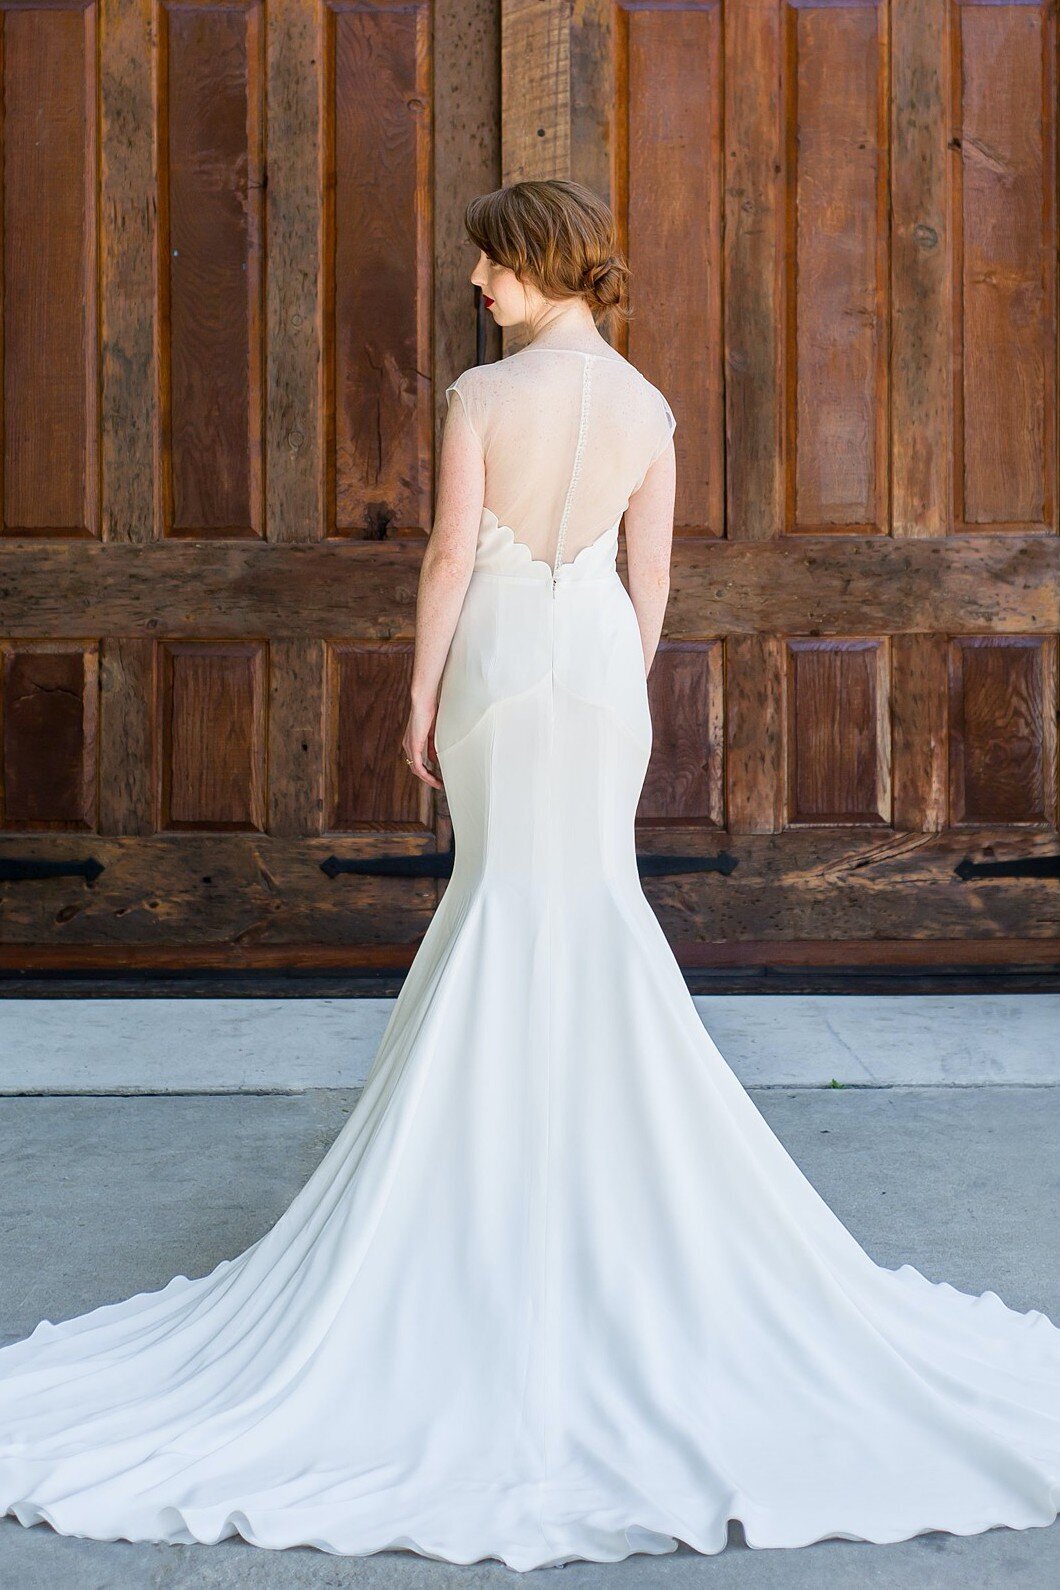 The mermaid silhouette of this crepe wedding gown is emphasized by the dramatic cathedral train and the illusion back bodice that points down to it.